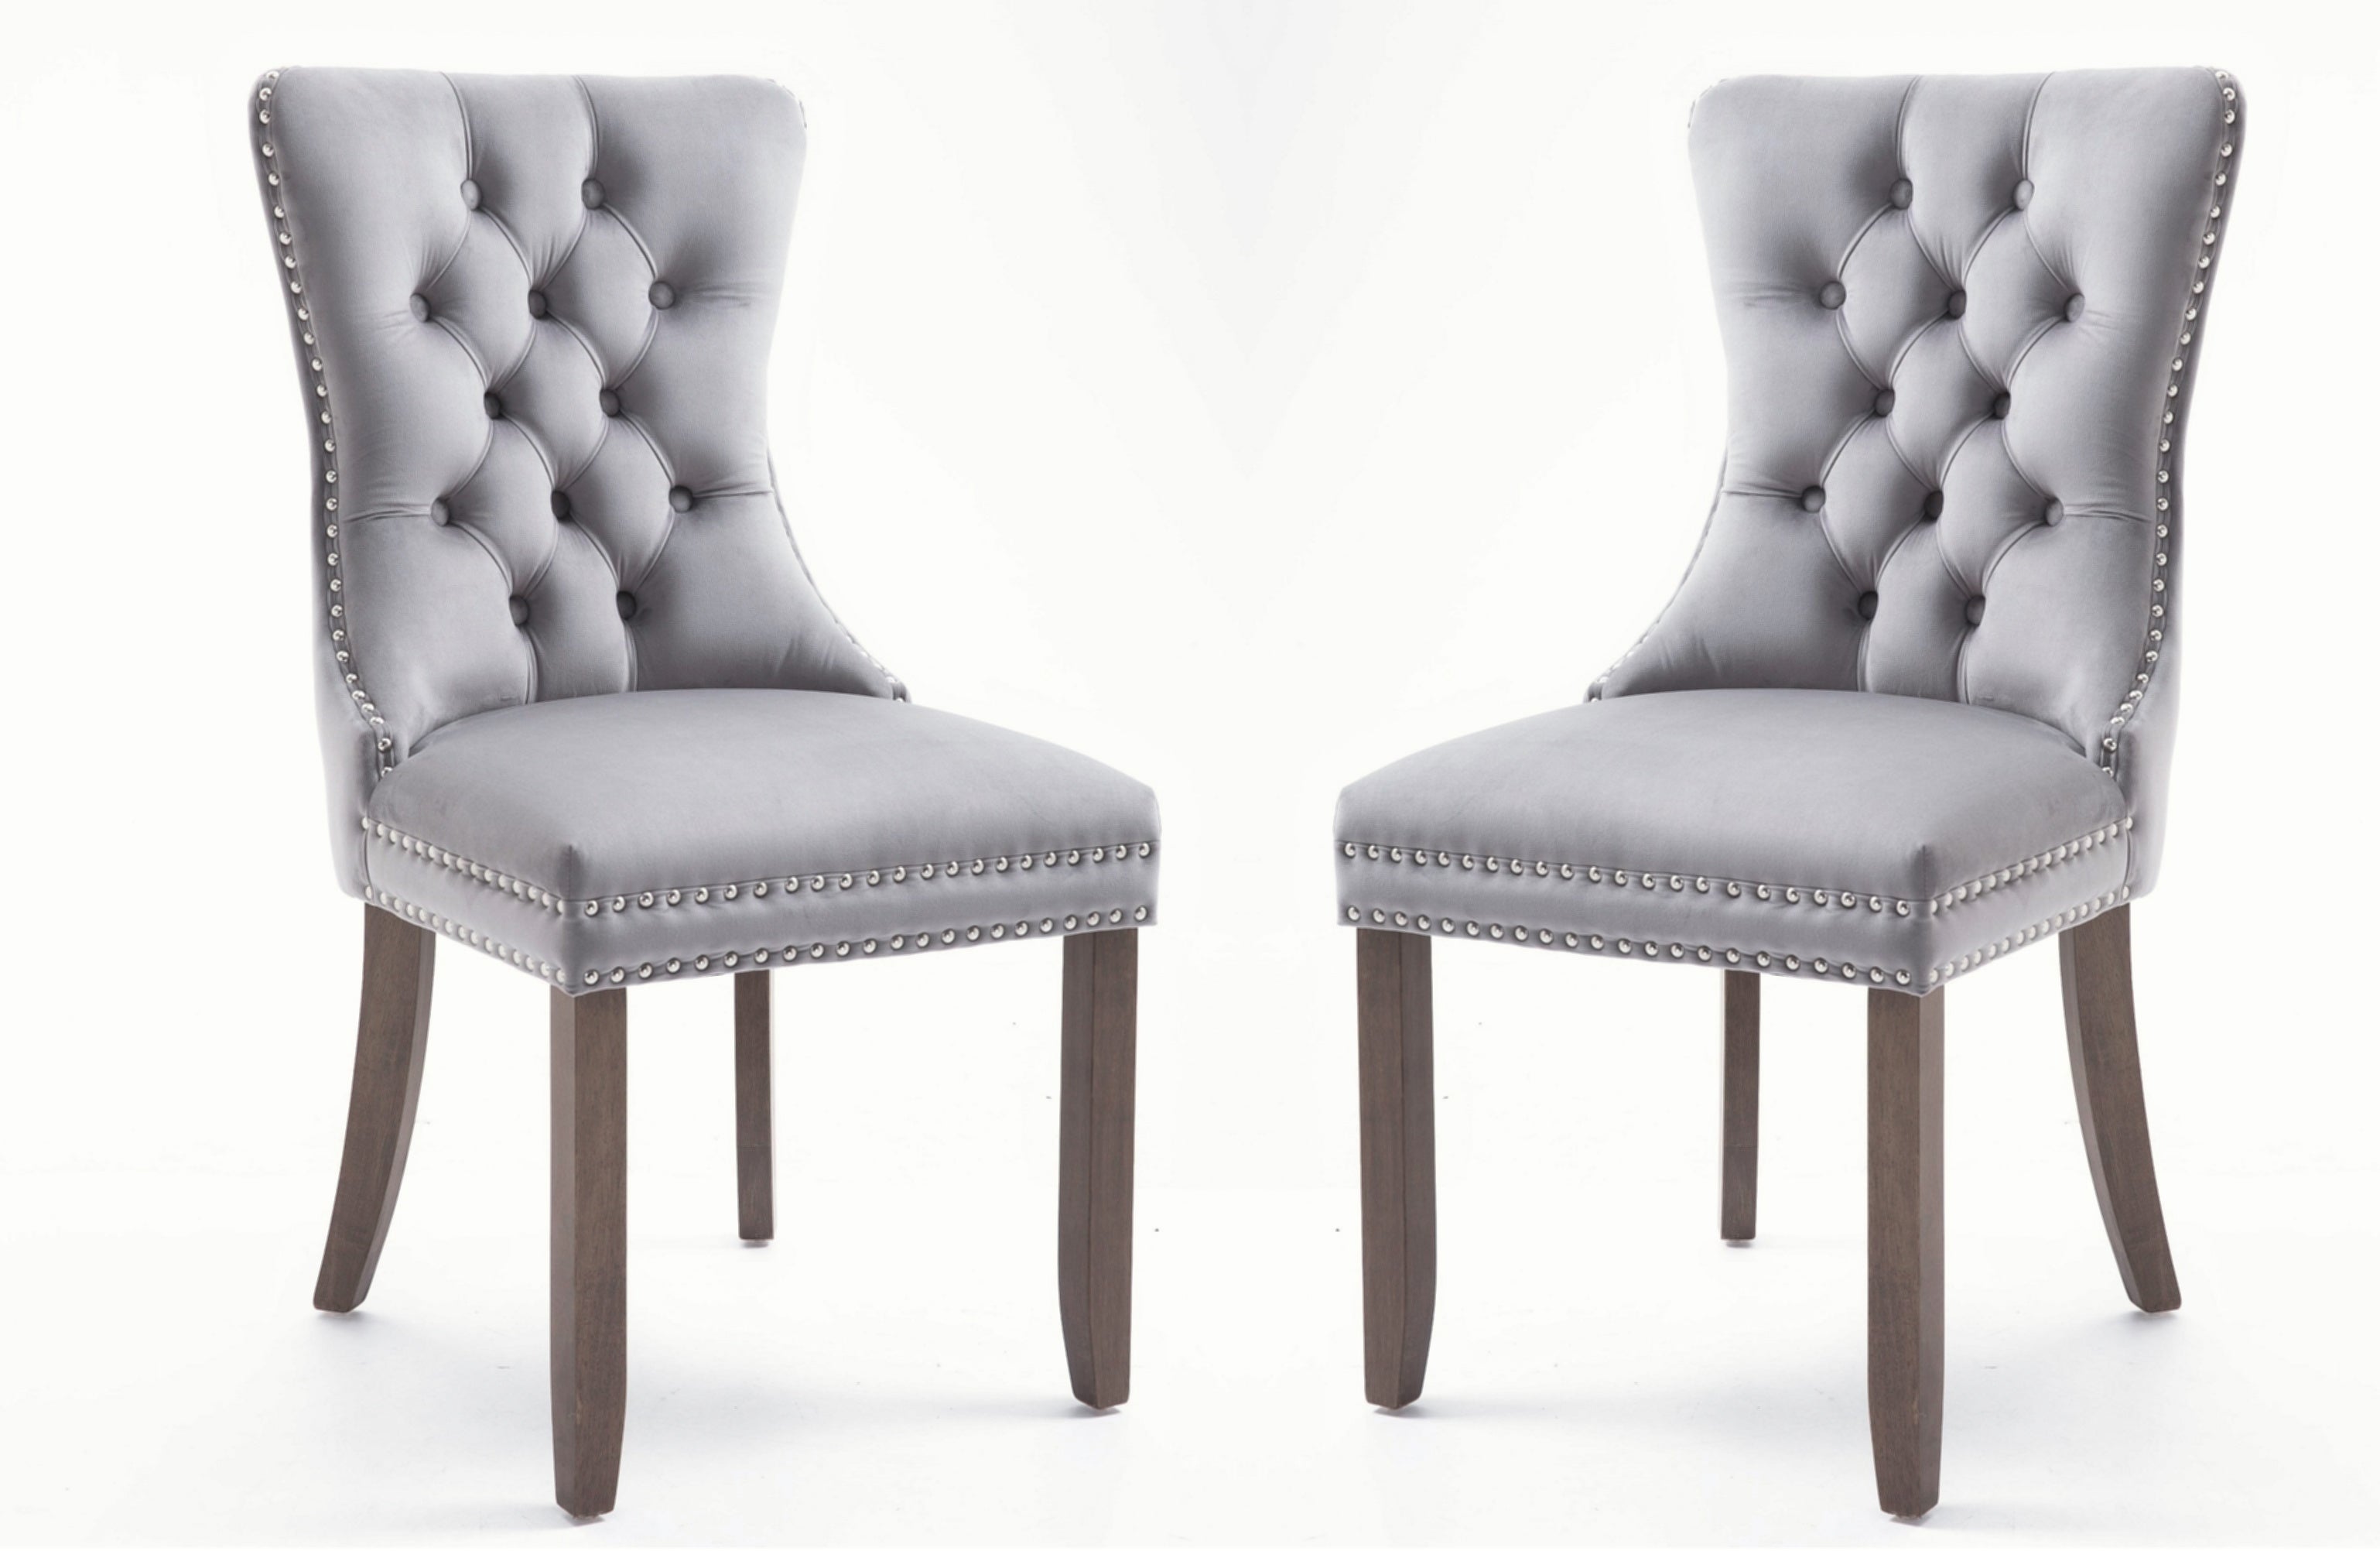 2 PCS High-end Tufted Solid Wood Upholstered Dining Chair with Nail-head Trim-Boyel Living